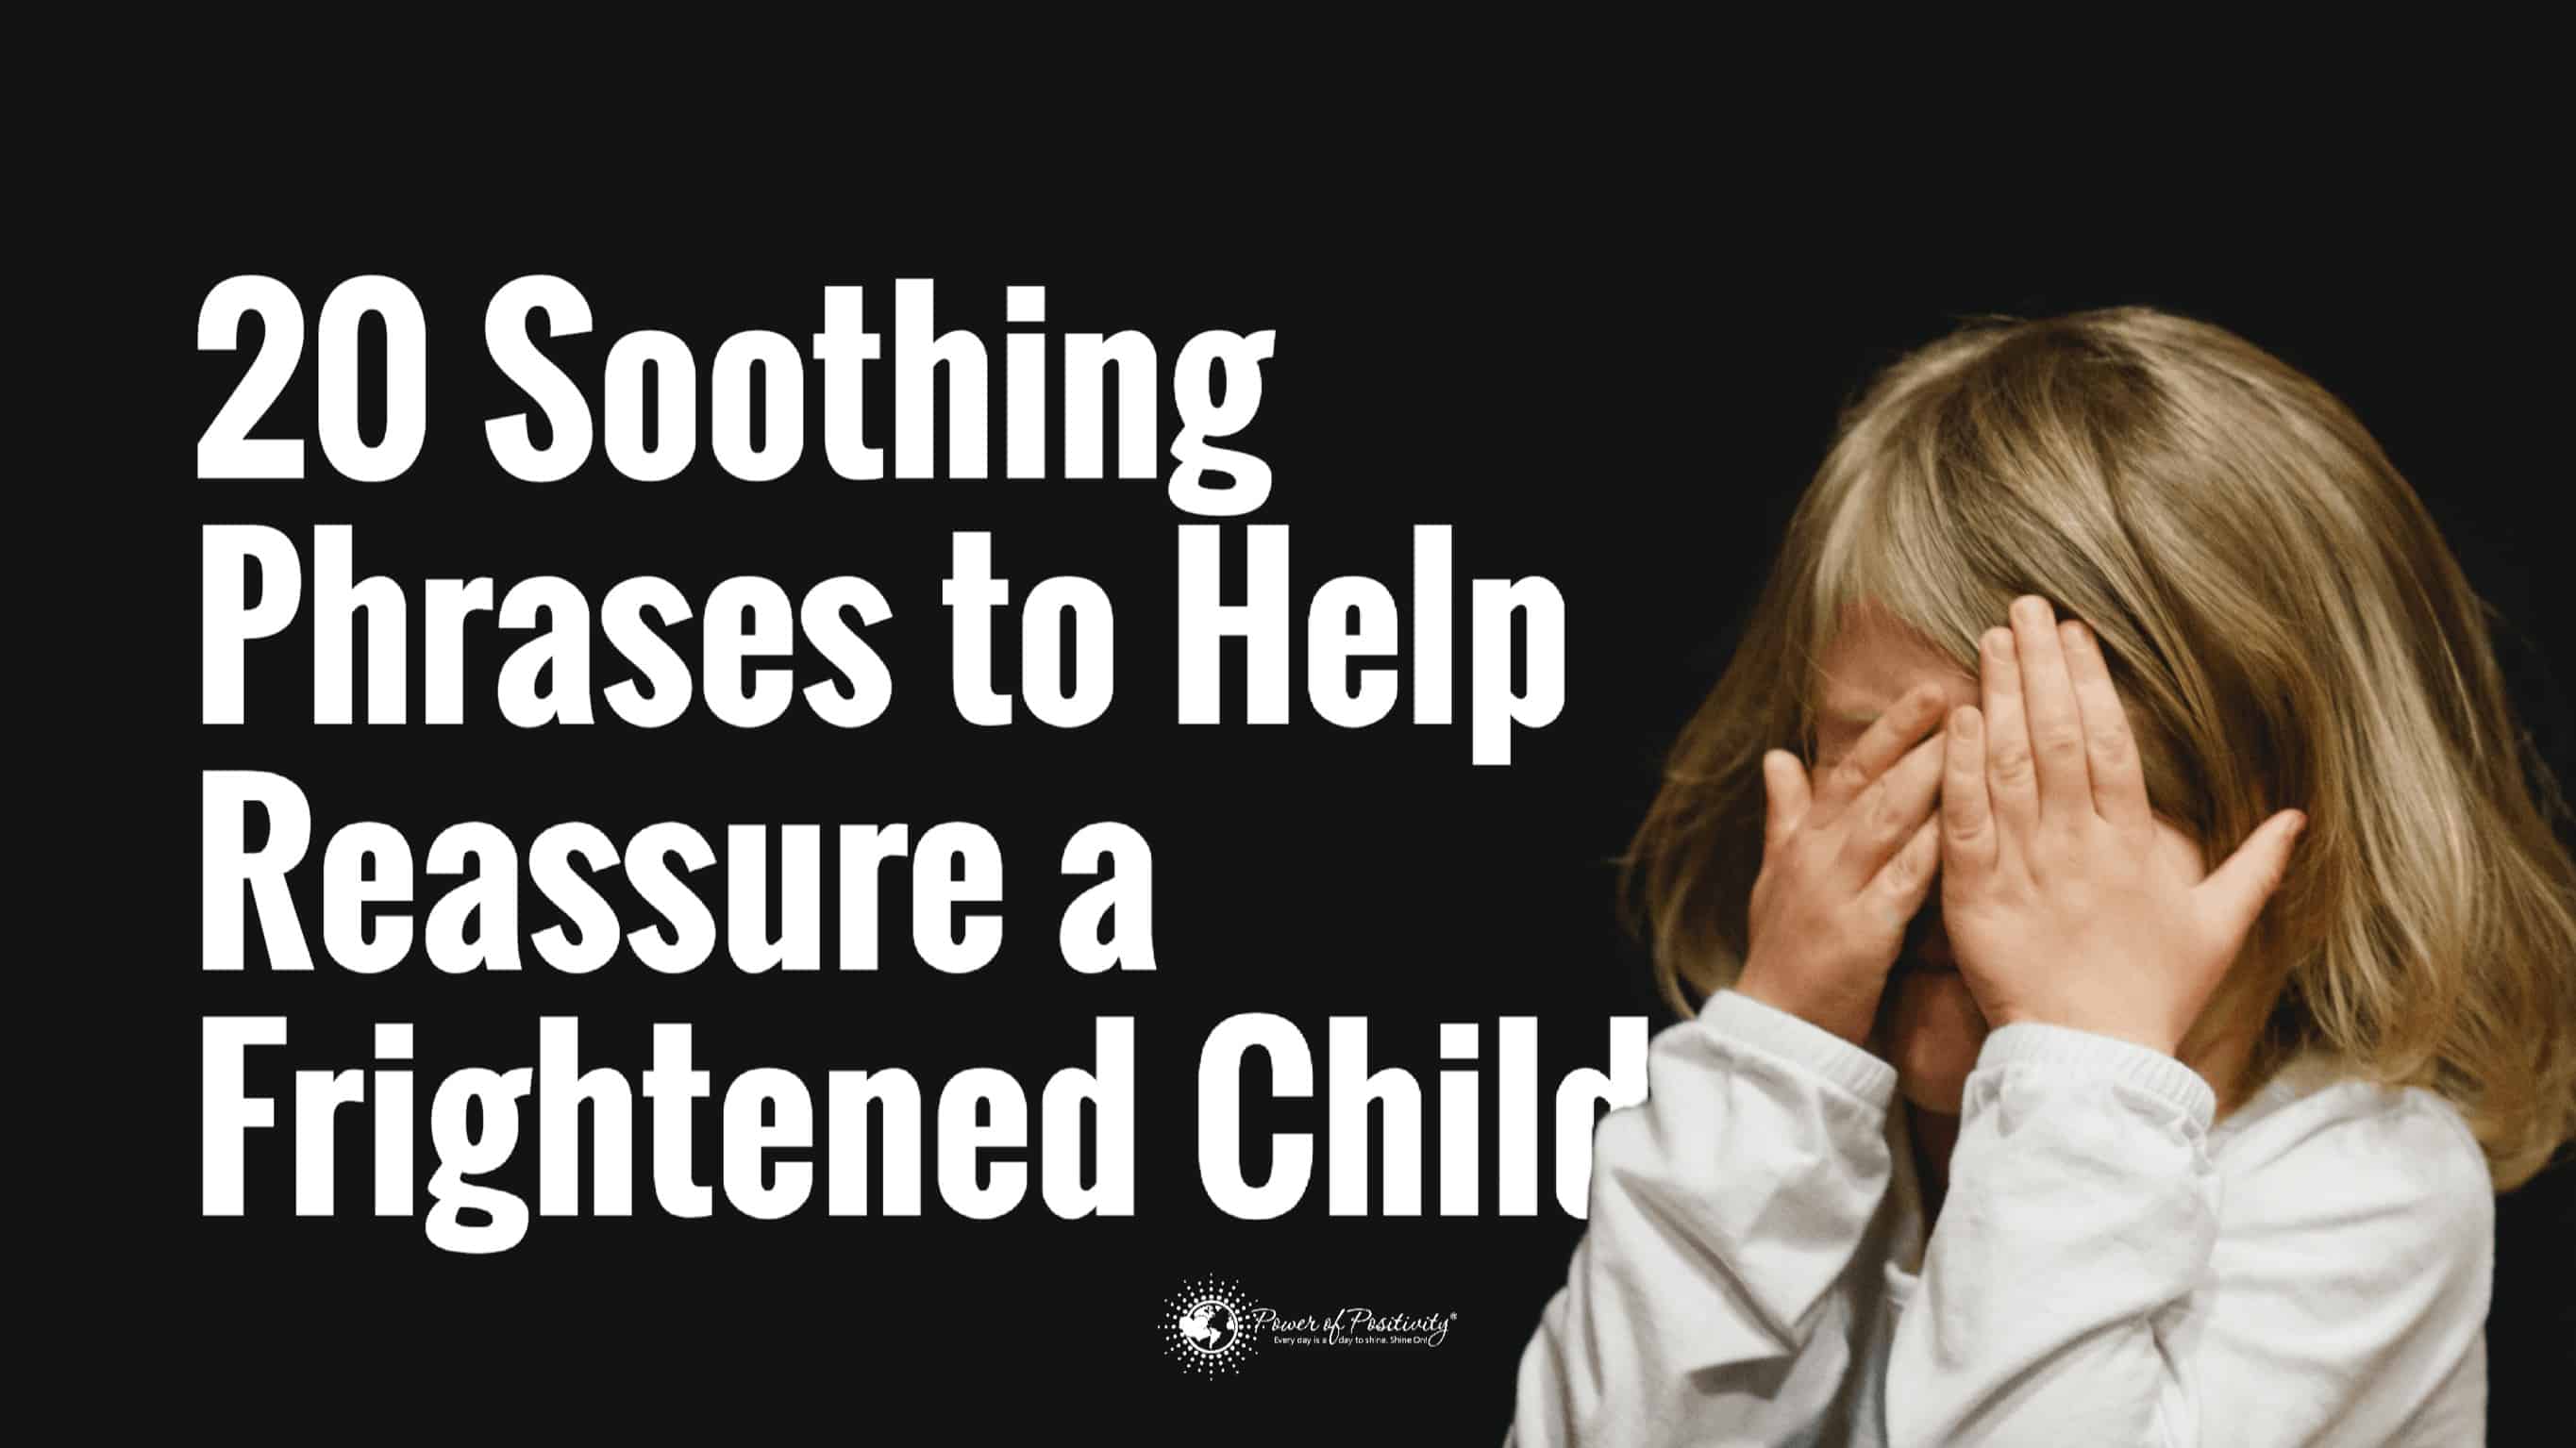 20 Soothing Phrases to Help Reassure a Frightened Child